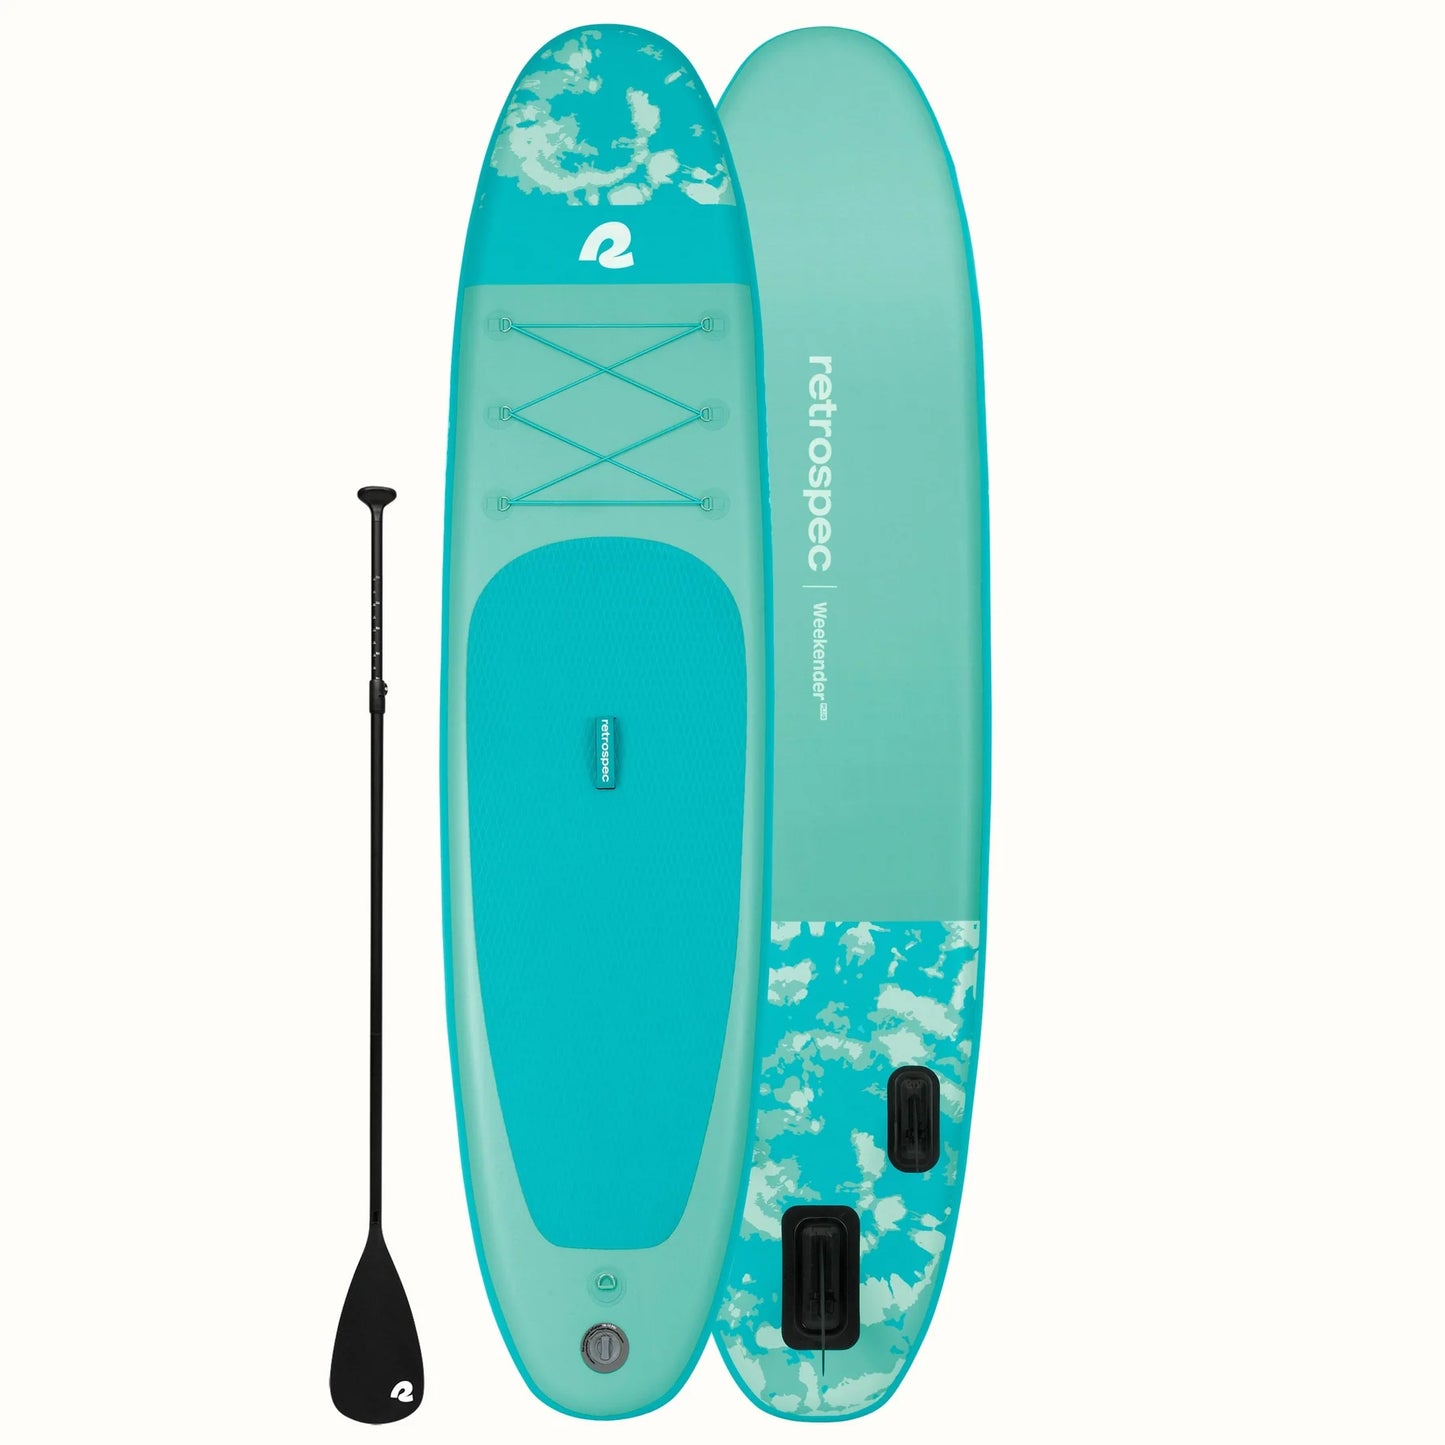 Retrospec Inflatable Standup Paddleboard iSUP Weekender Plus 10' Inflatable Stand Up Paddle Board (Legacy) Seafoam TieDye Color Condition New Max 300 LB Stand Up Paddle Board Inflatable Boating